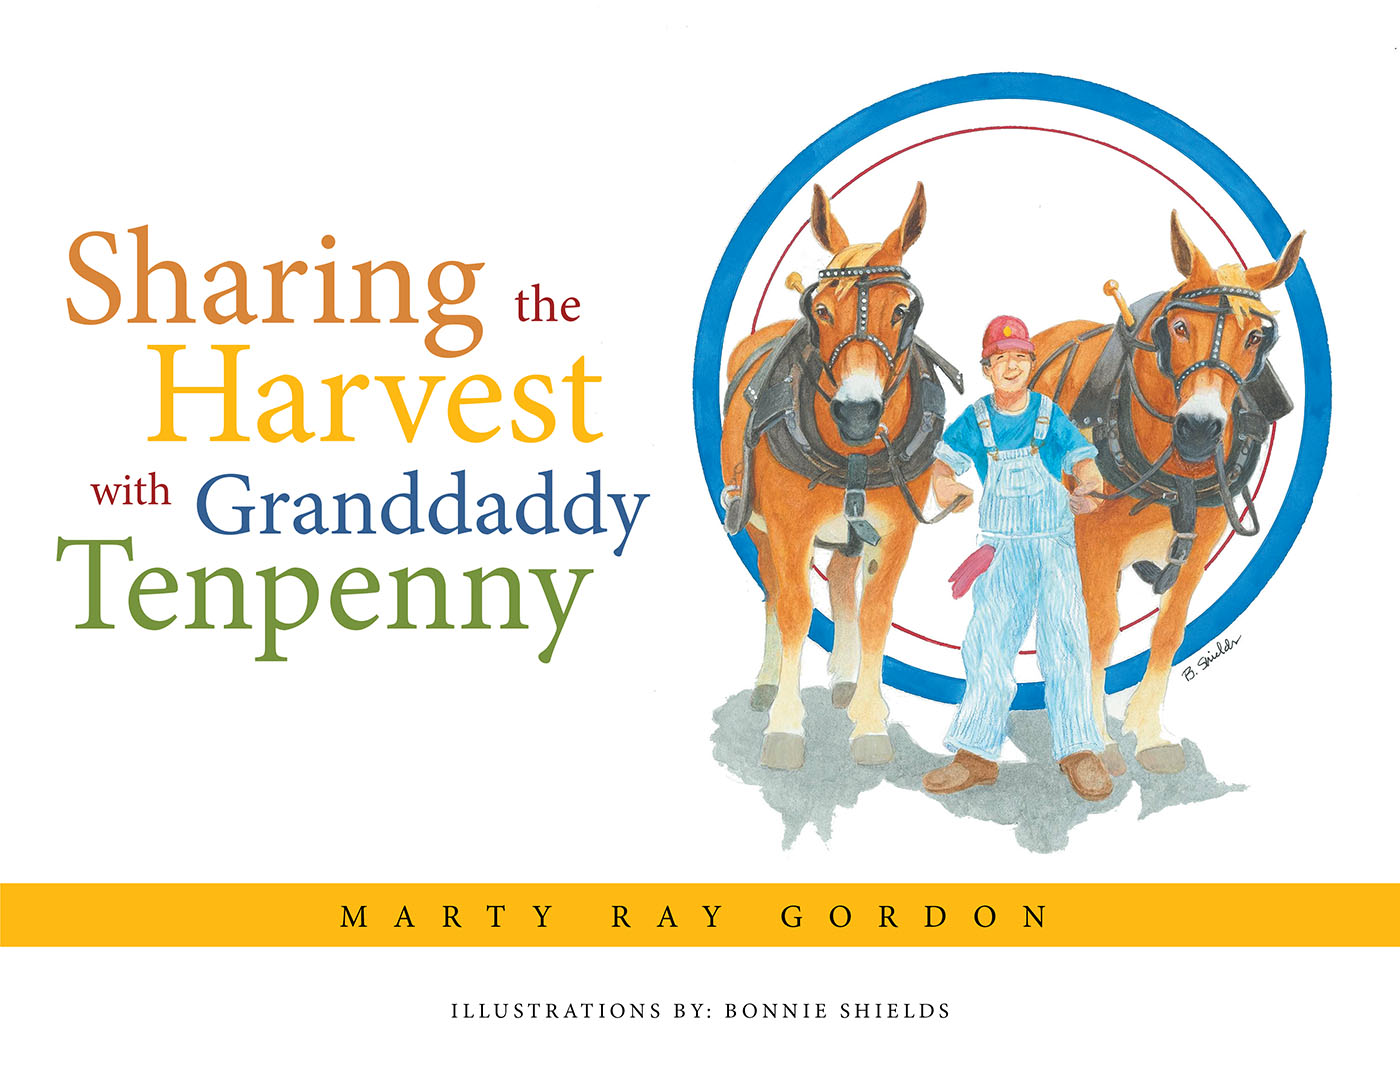 Marty Ray Gordon’s Newly Released "Sharing the Harvest with Granddaddy Tenpenny" is an Enjoyable and Nostalgic Children’s Tale from the Family Farm